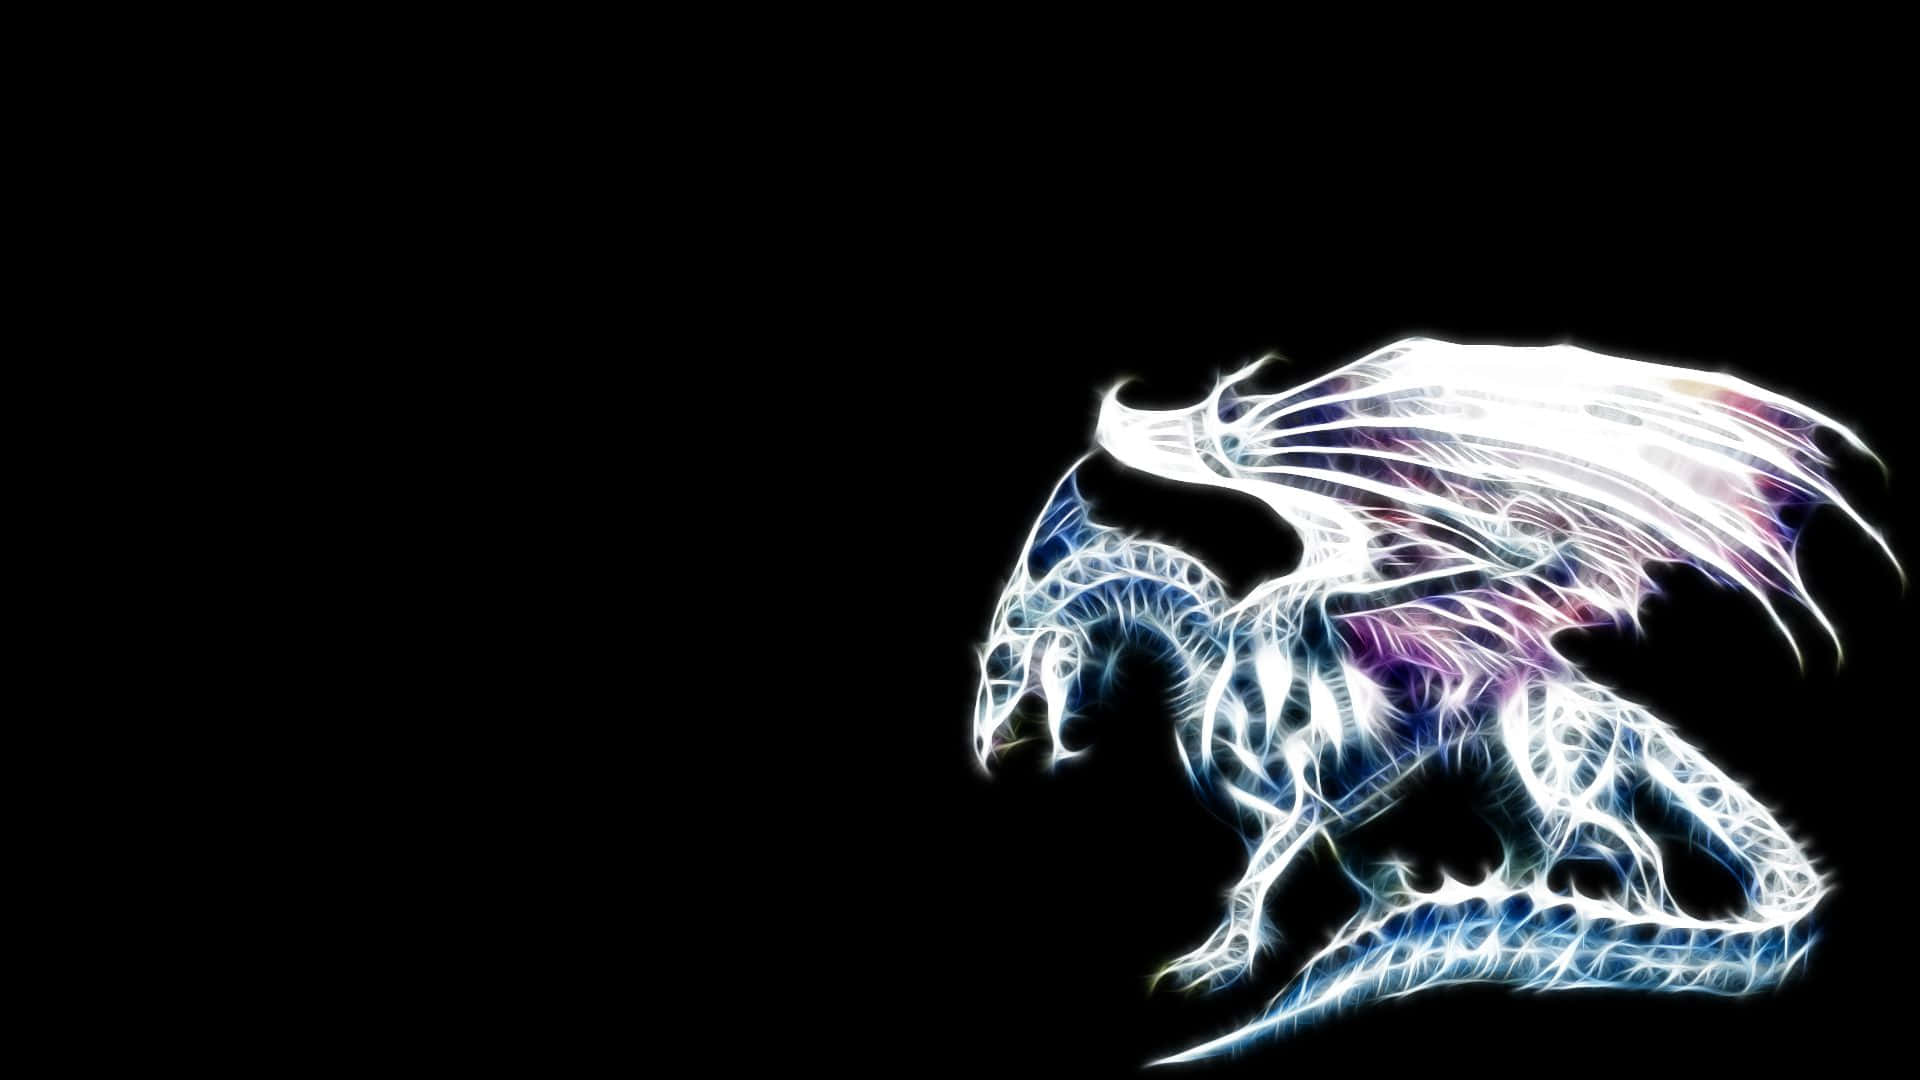 "The Mystical Power of the Awsome Cool Dragon" Wallpaper